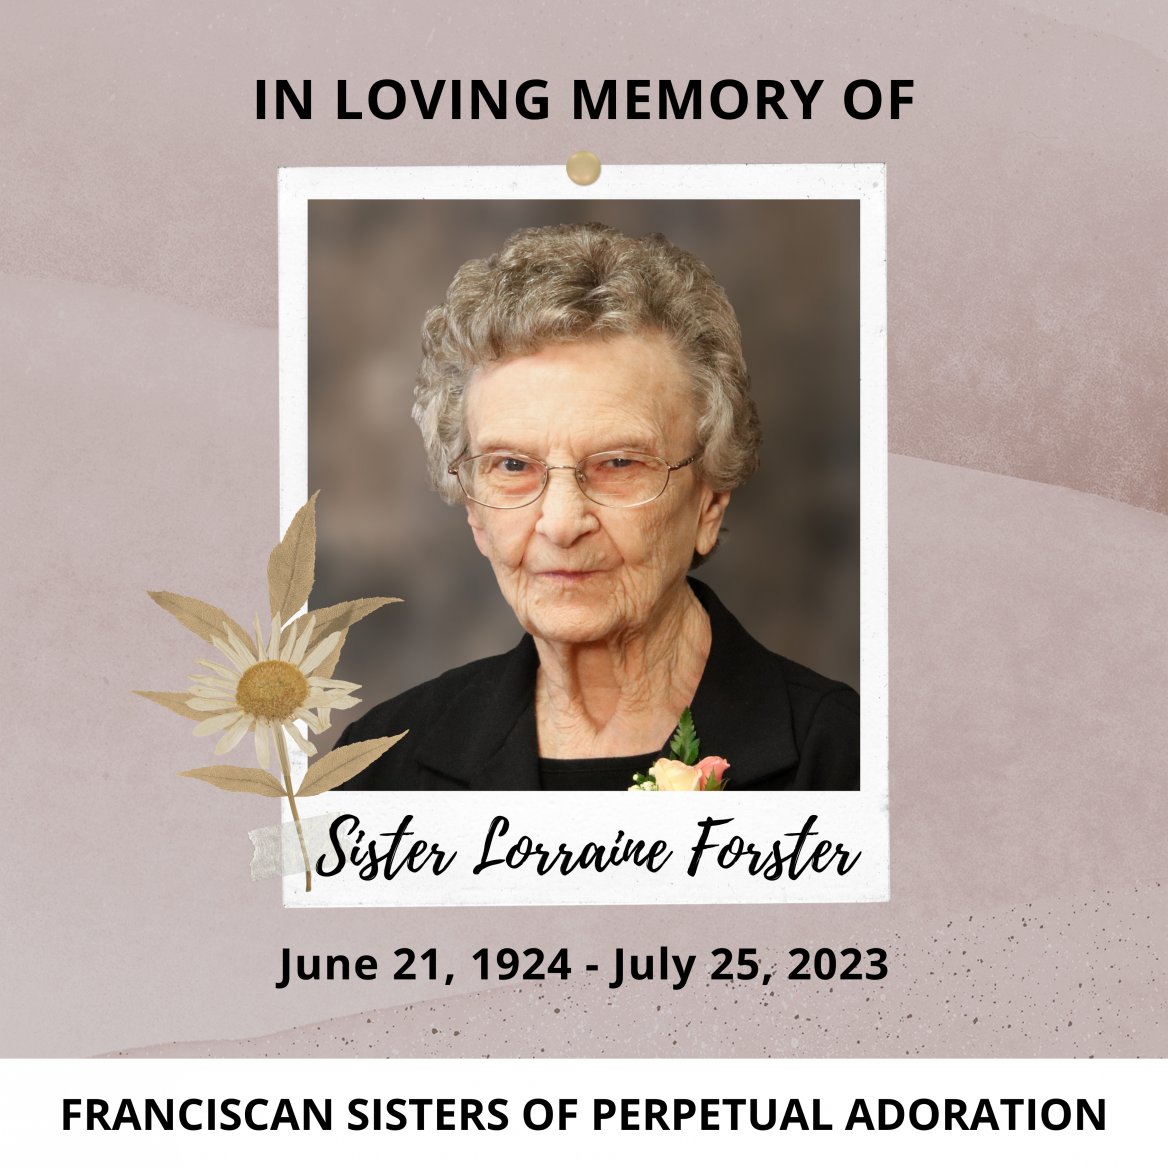 In loving memory of Franciscan Sister of Perpetual Adoration Lorraine Forster